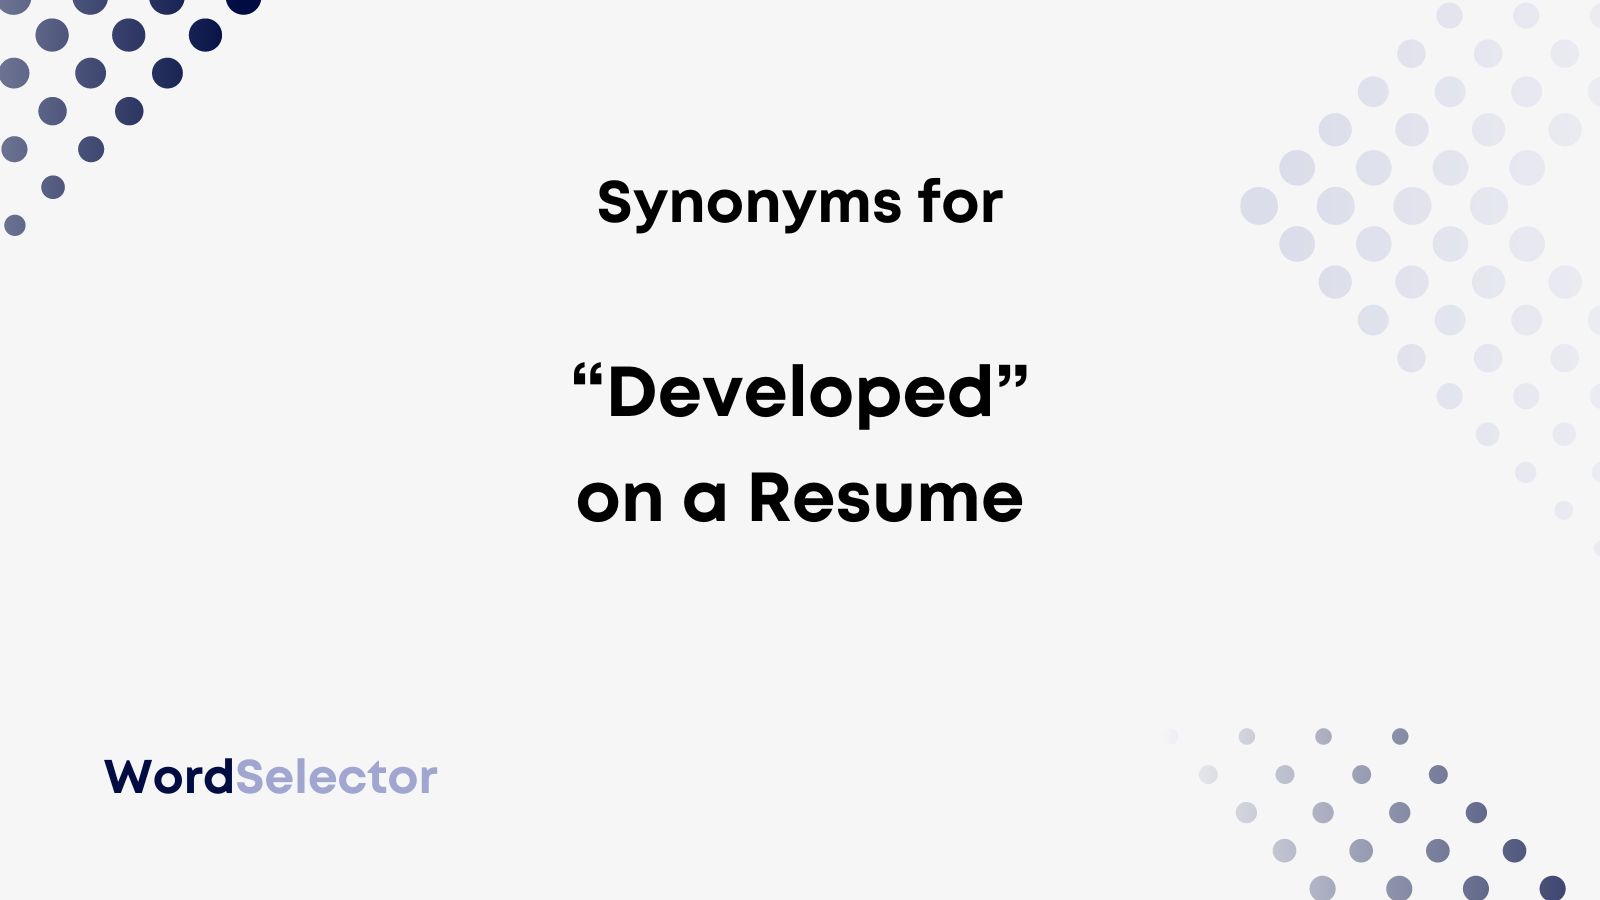 27 Synonyms for "Developed" on Your Resume WordSelector